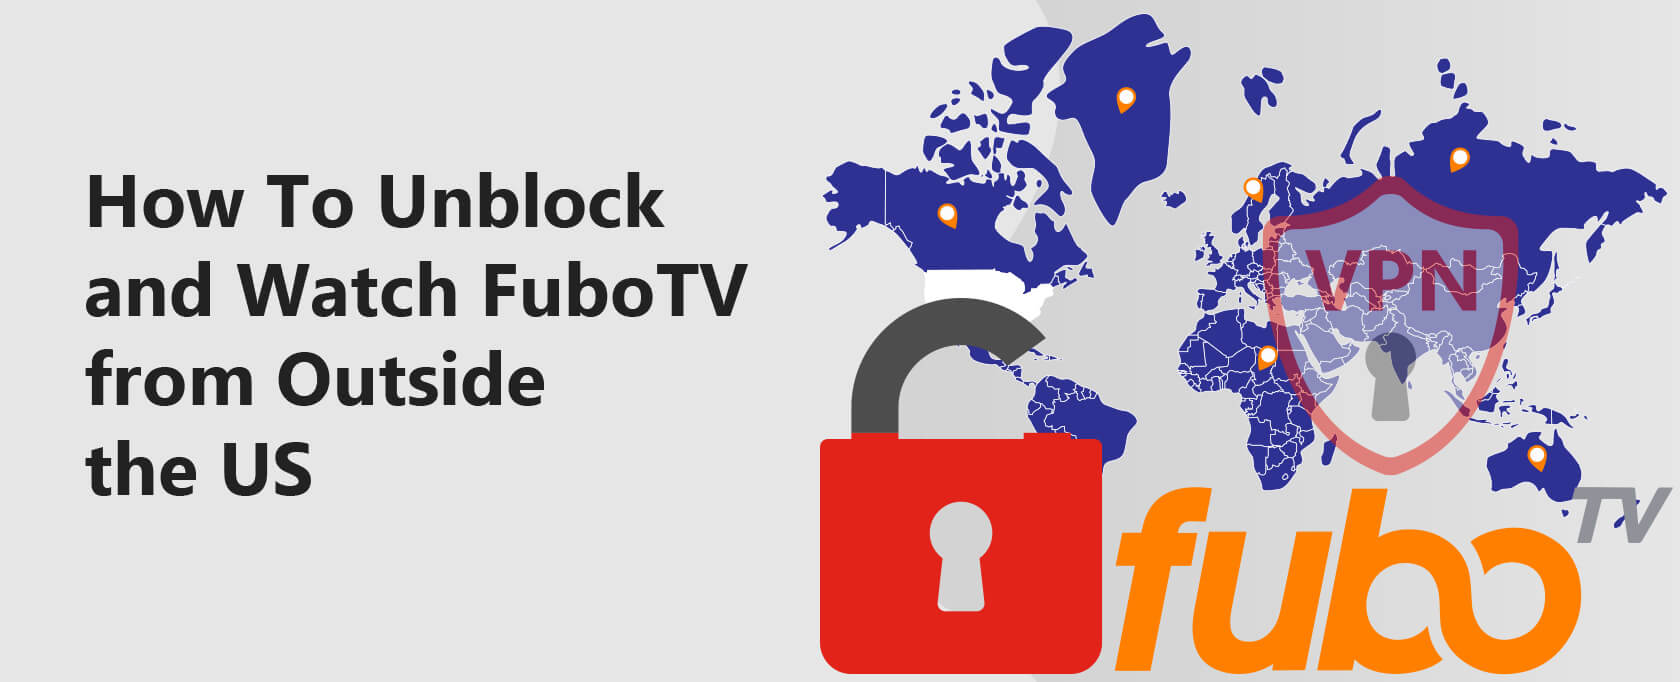 How To Watch and Unblock FuboTV from Outside the US